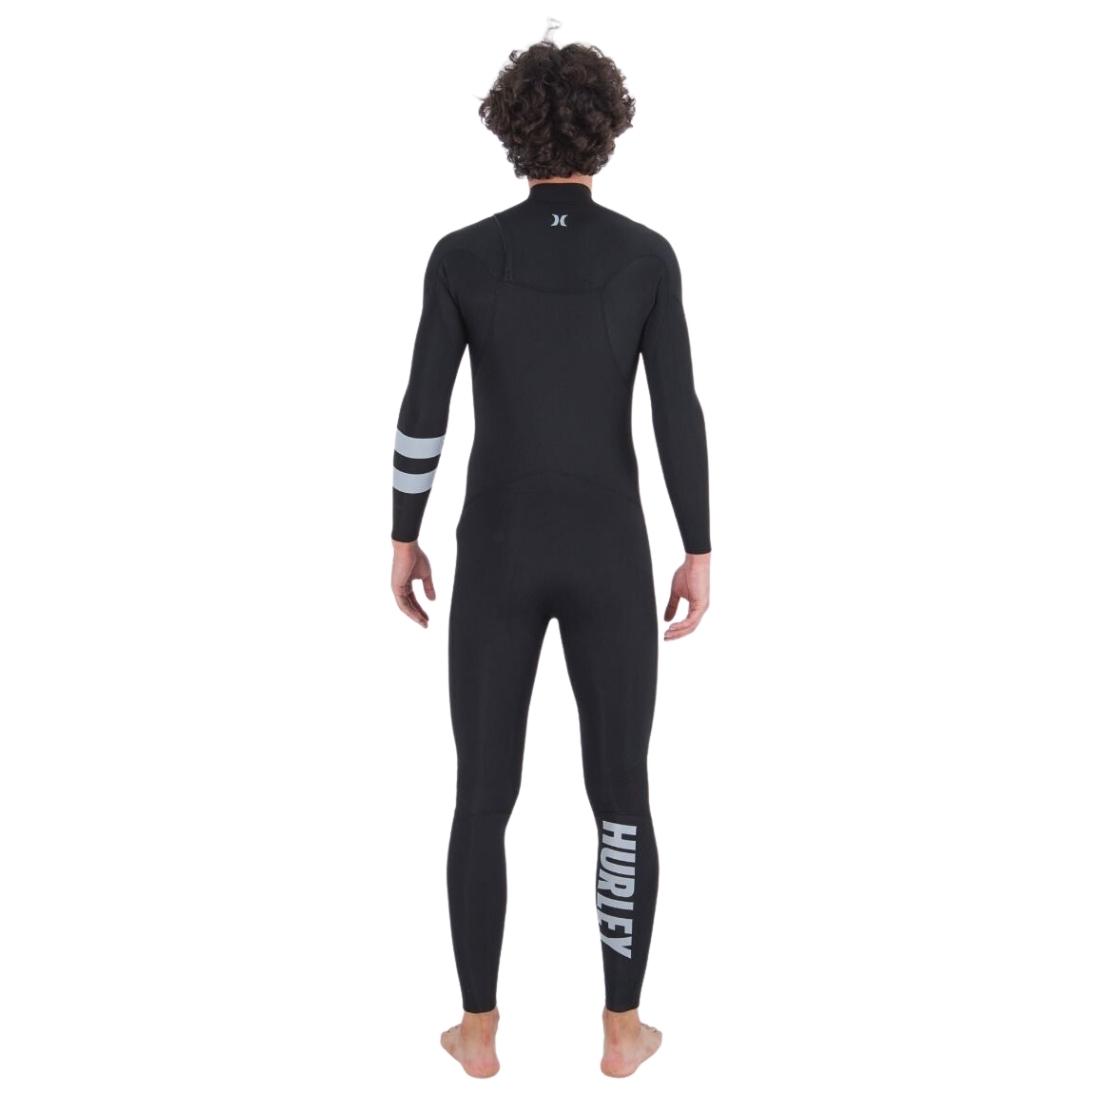 Hurley Mens Advantage 3/2mm Wetsuit - Black - Mens Full Length Wetsuit by Hurley